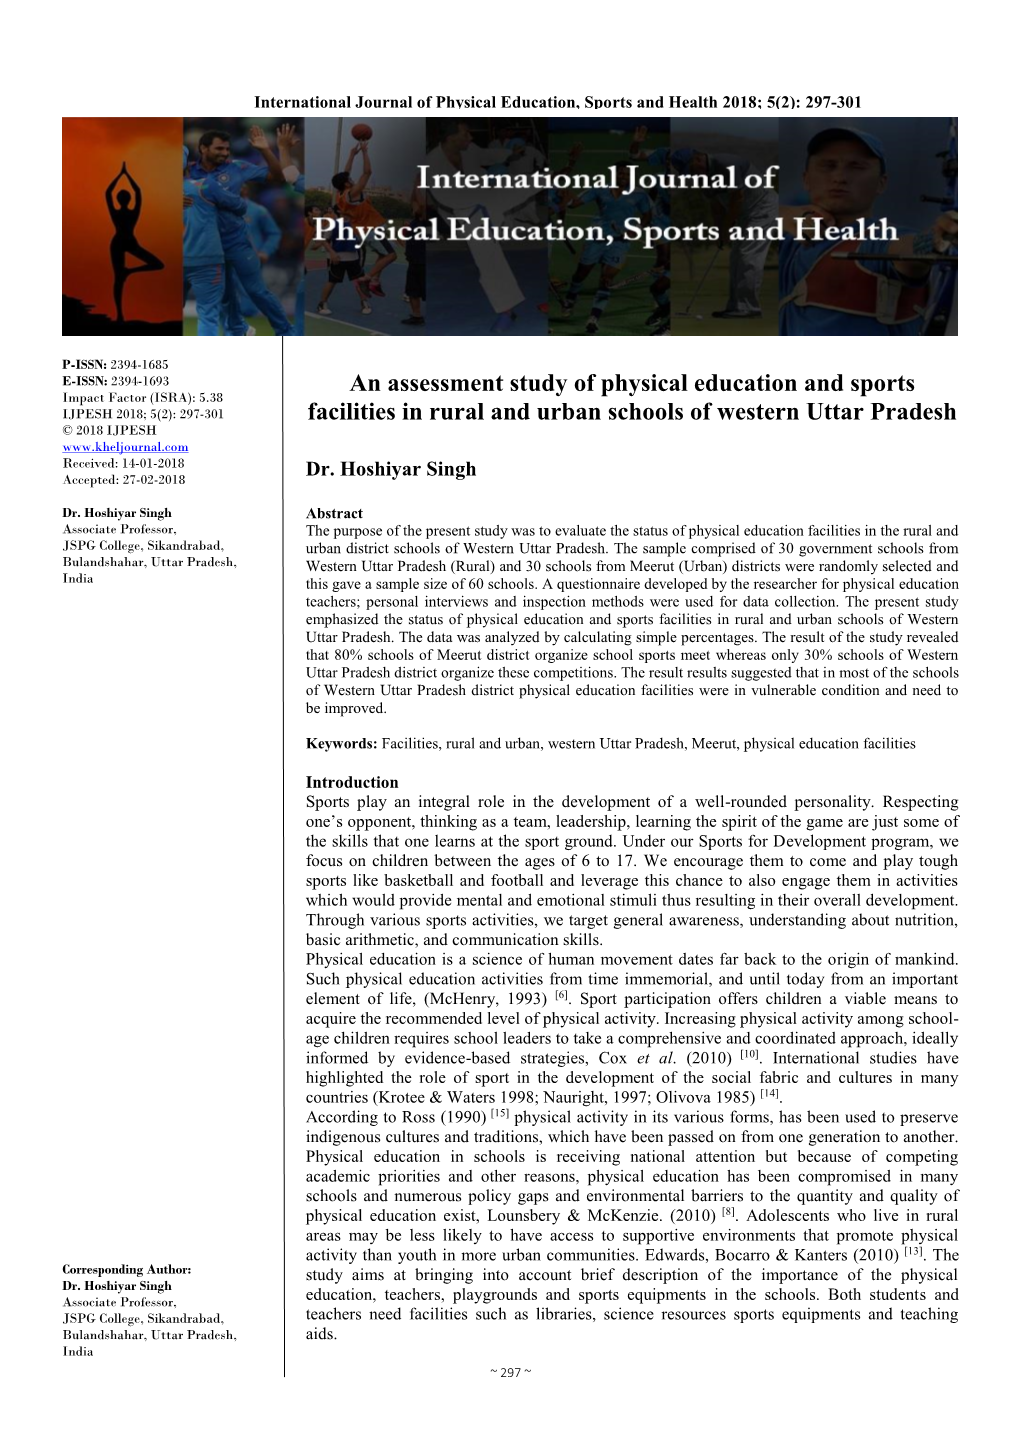 An Assessment Study of Physical Education and Sports Facilities In